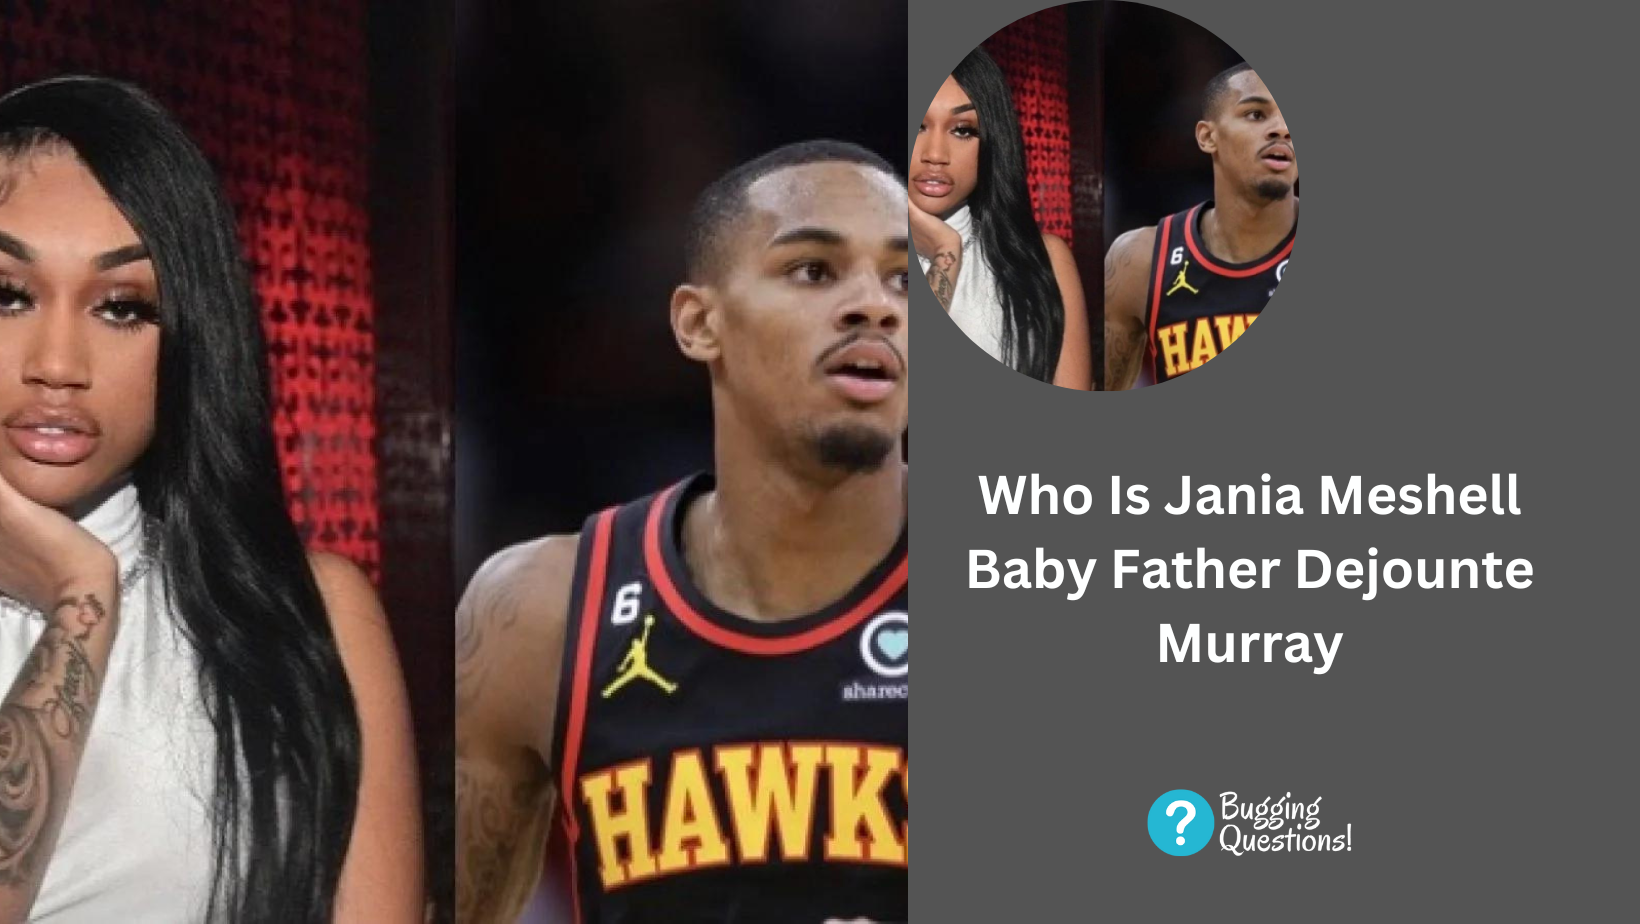 Who Is Jania Meshell Baby Father Dejounte Murray?